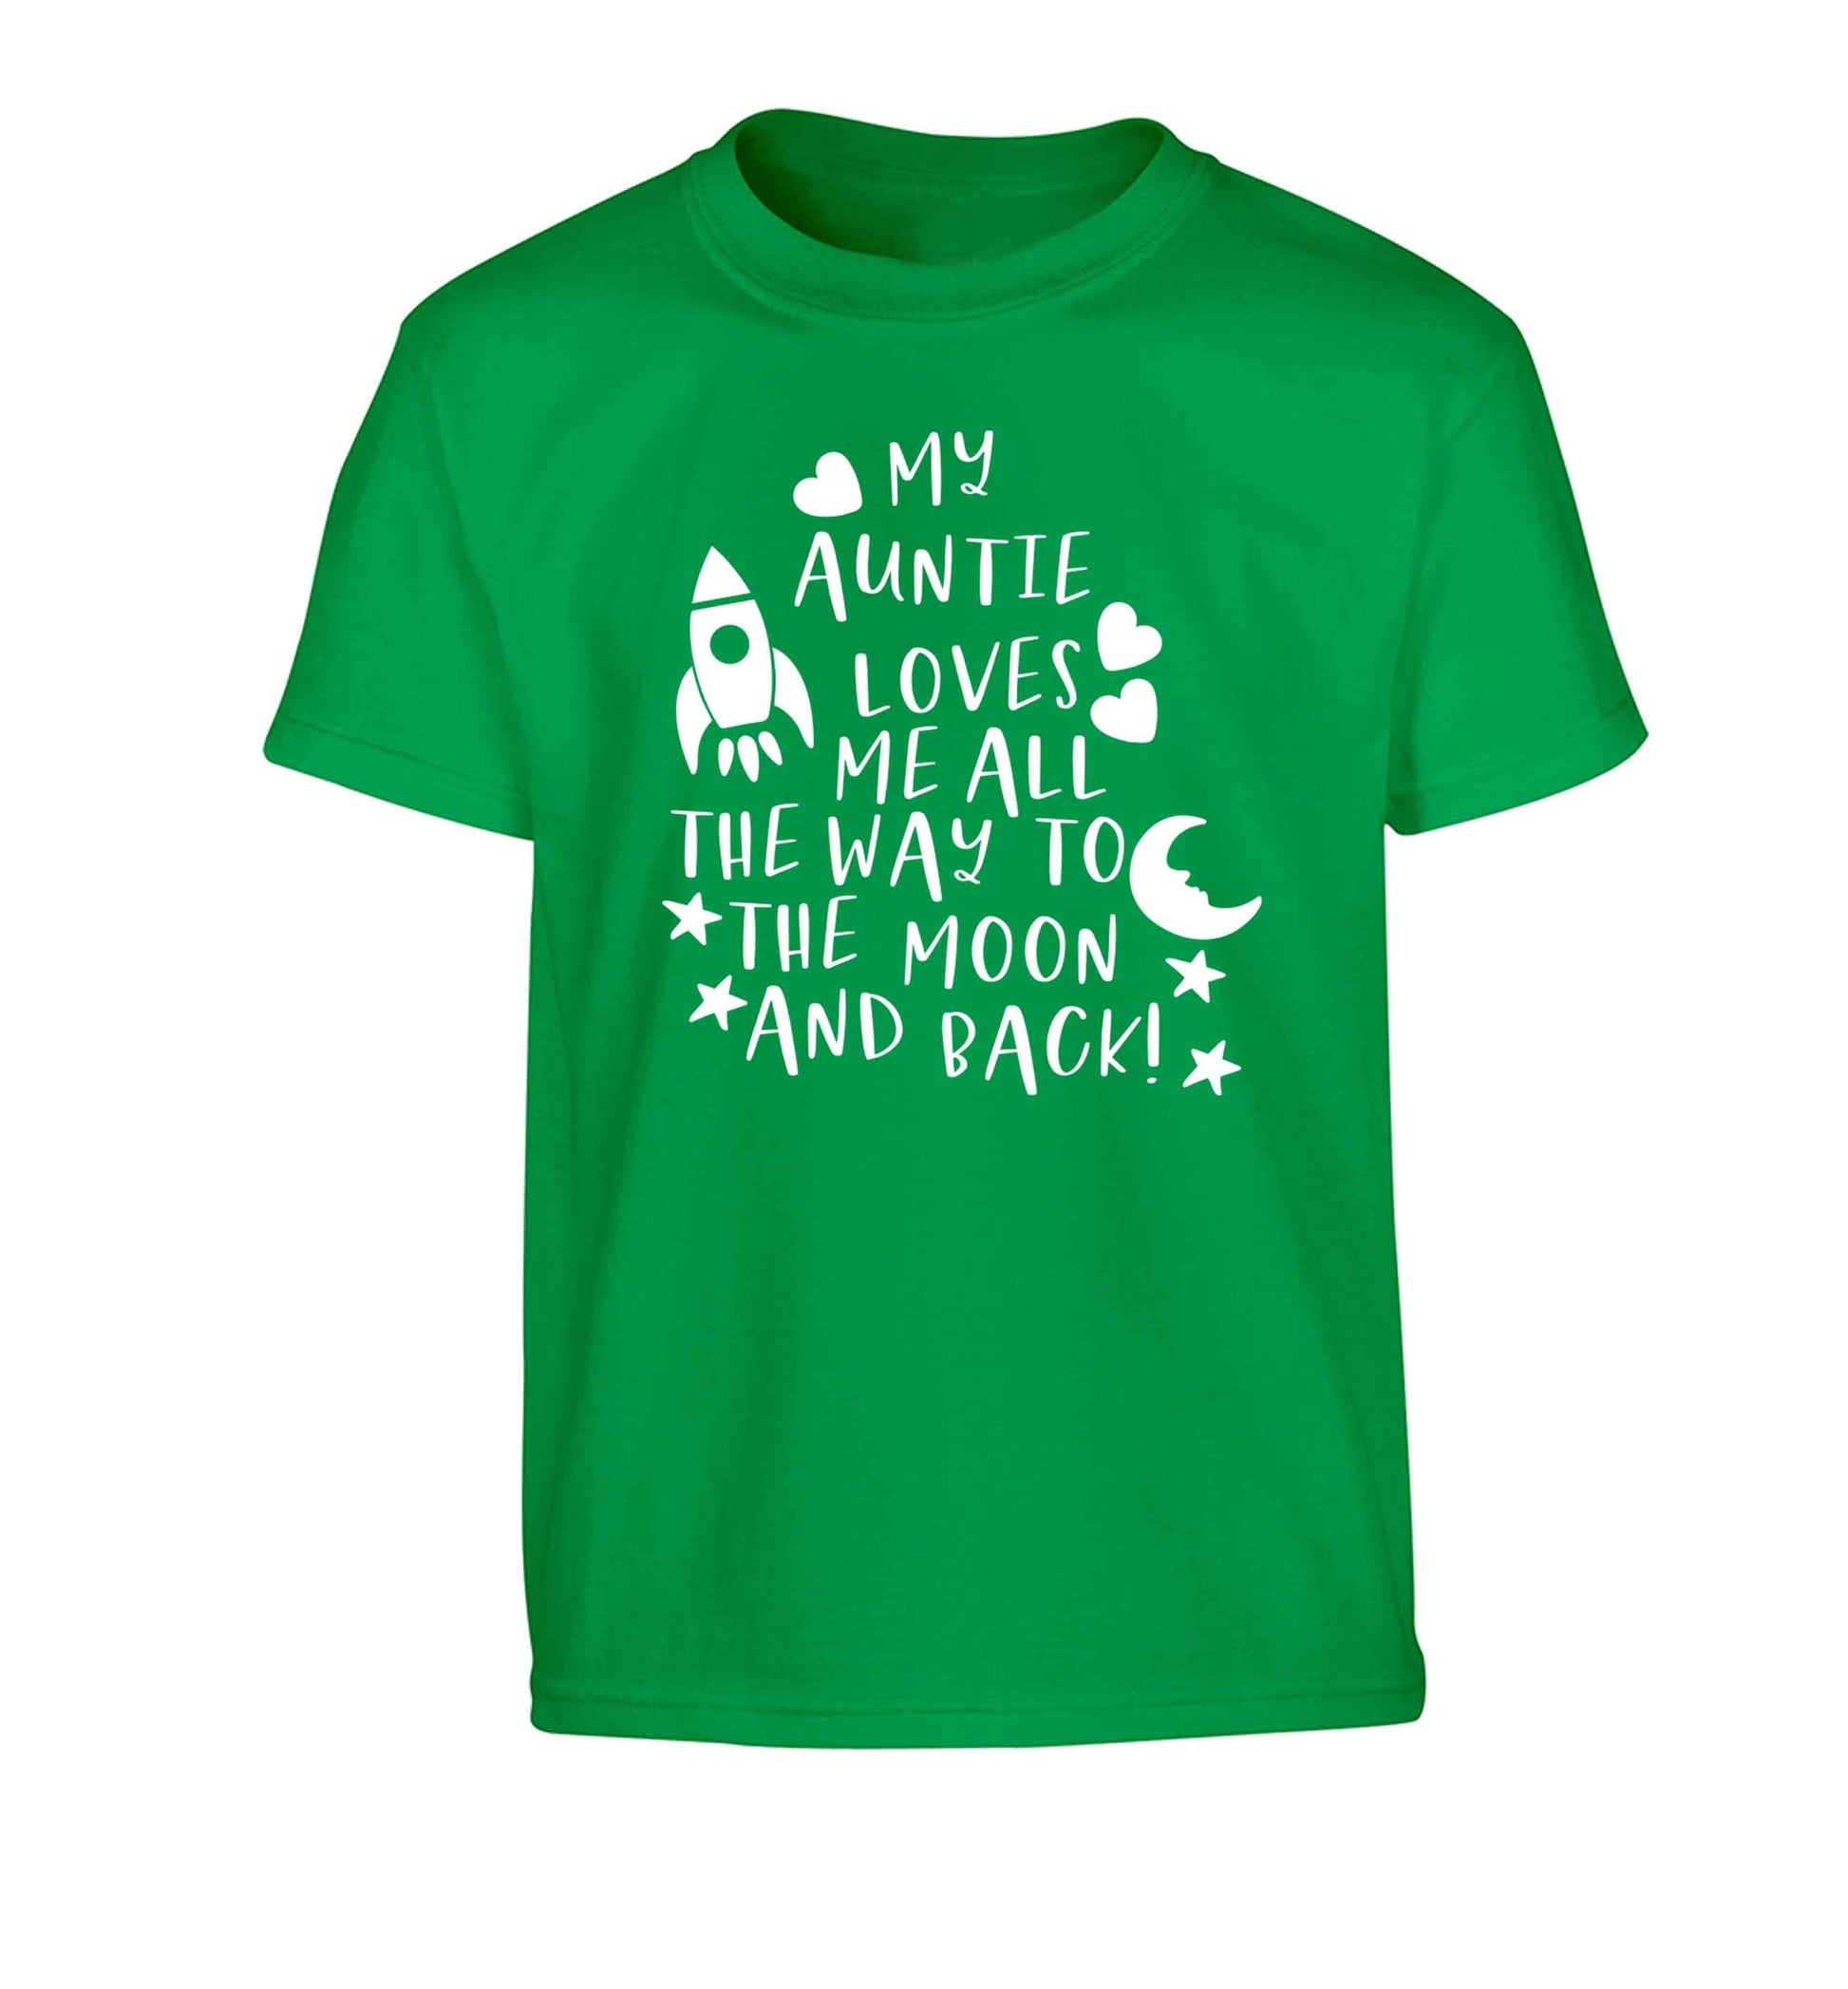 My auntie loves me all the way to the moon and back Children's green Tshirt 12-13 Years